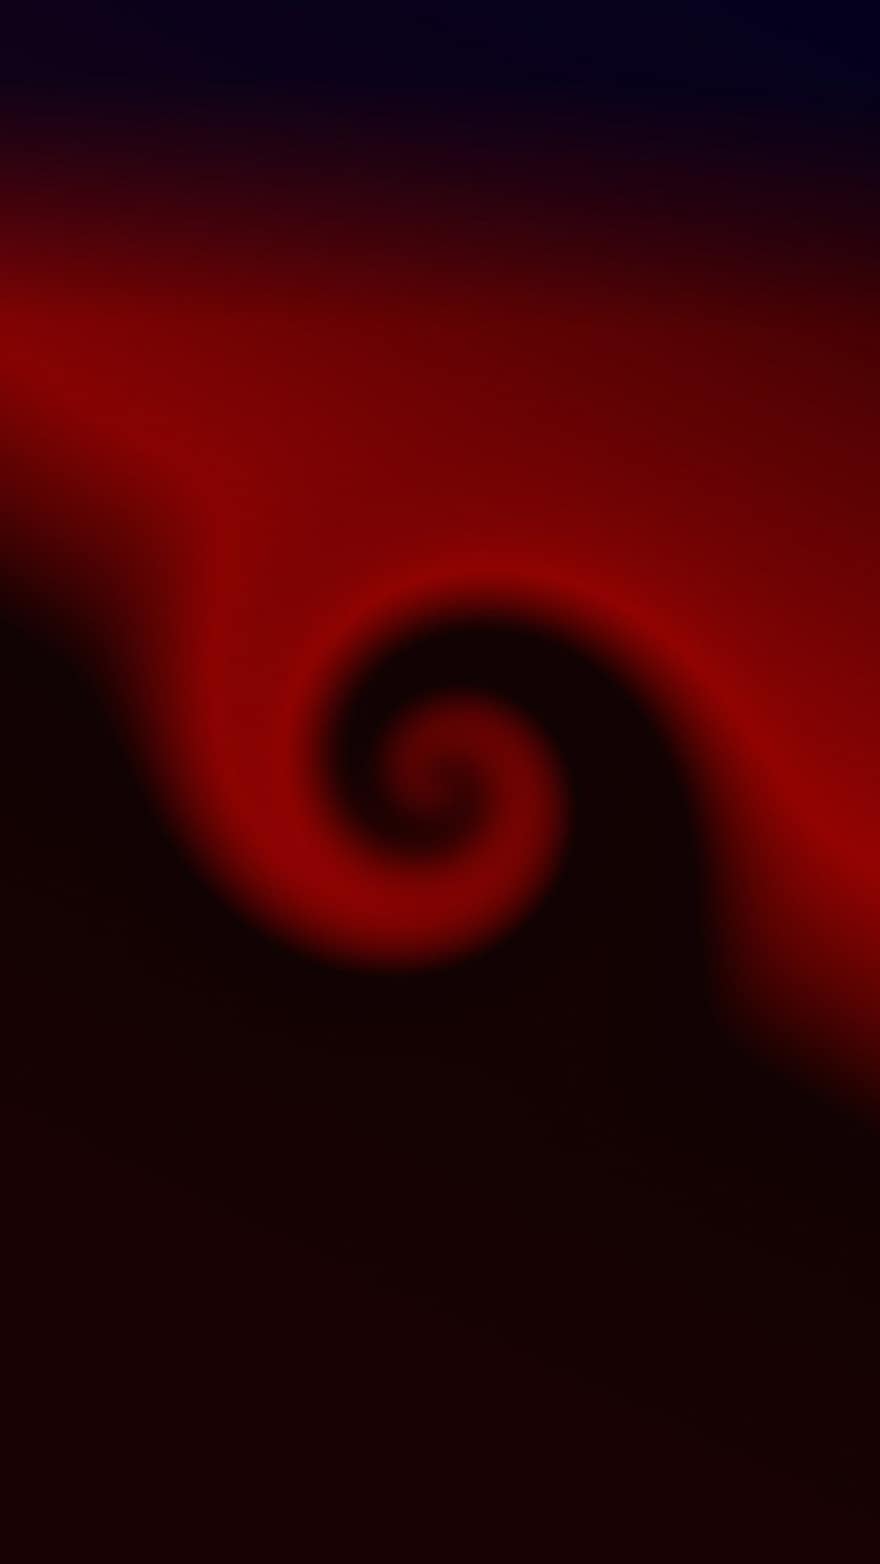 Spiral, Background, Black, Red, Abstract